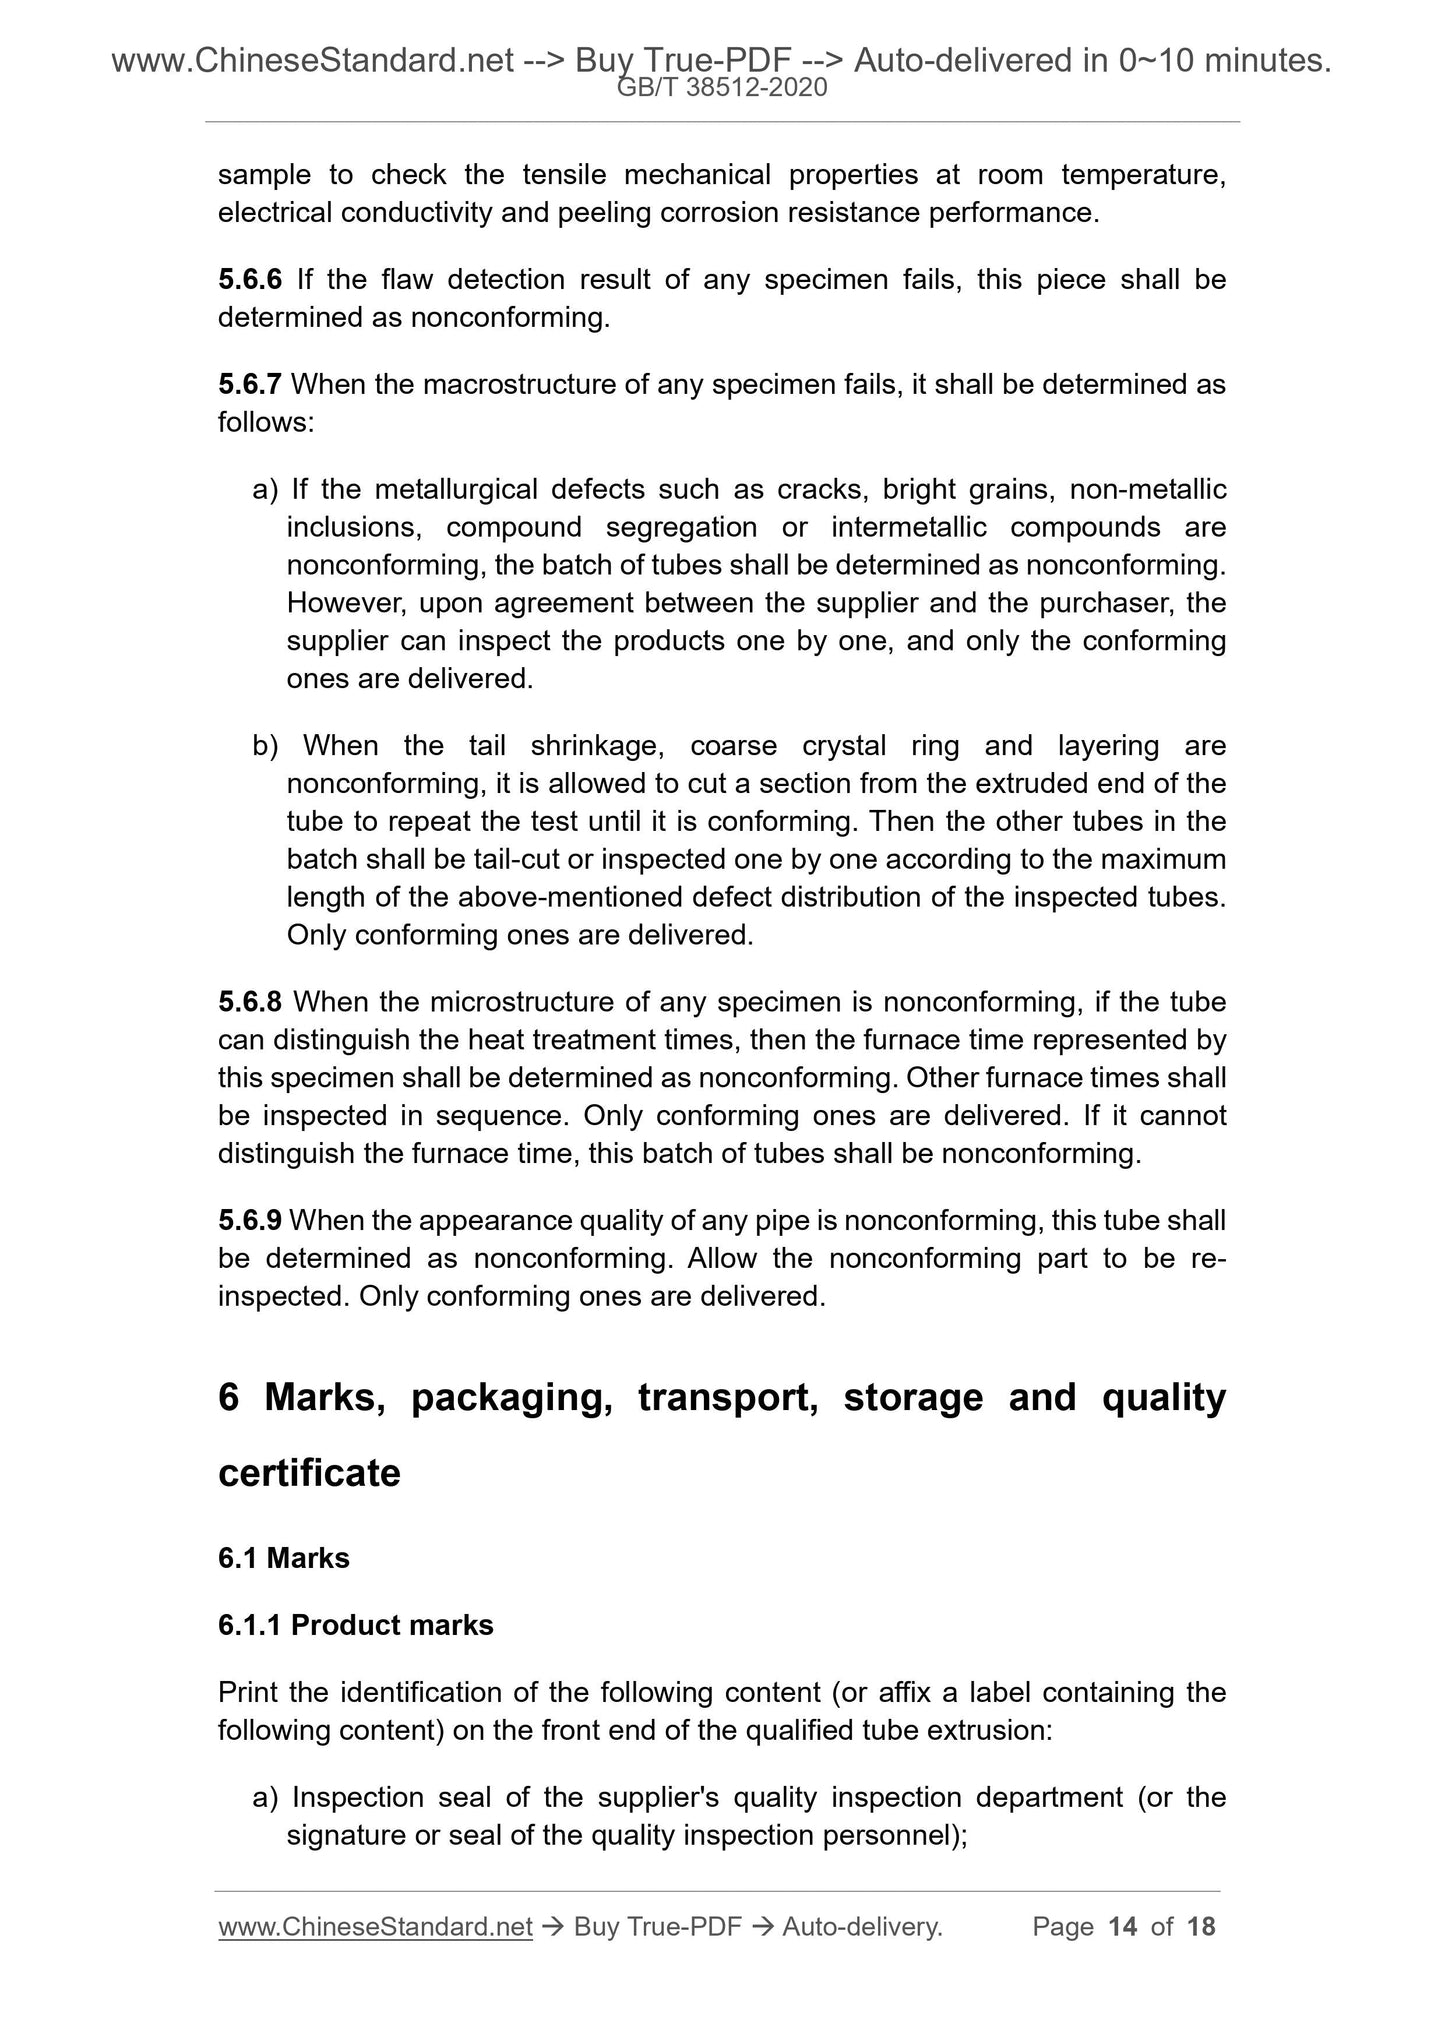 GB/T 38512-2020 Page 7